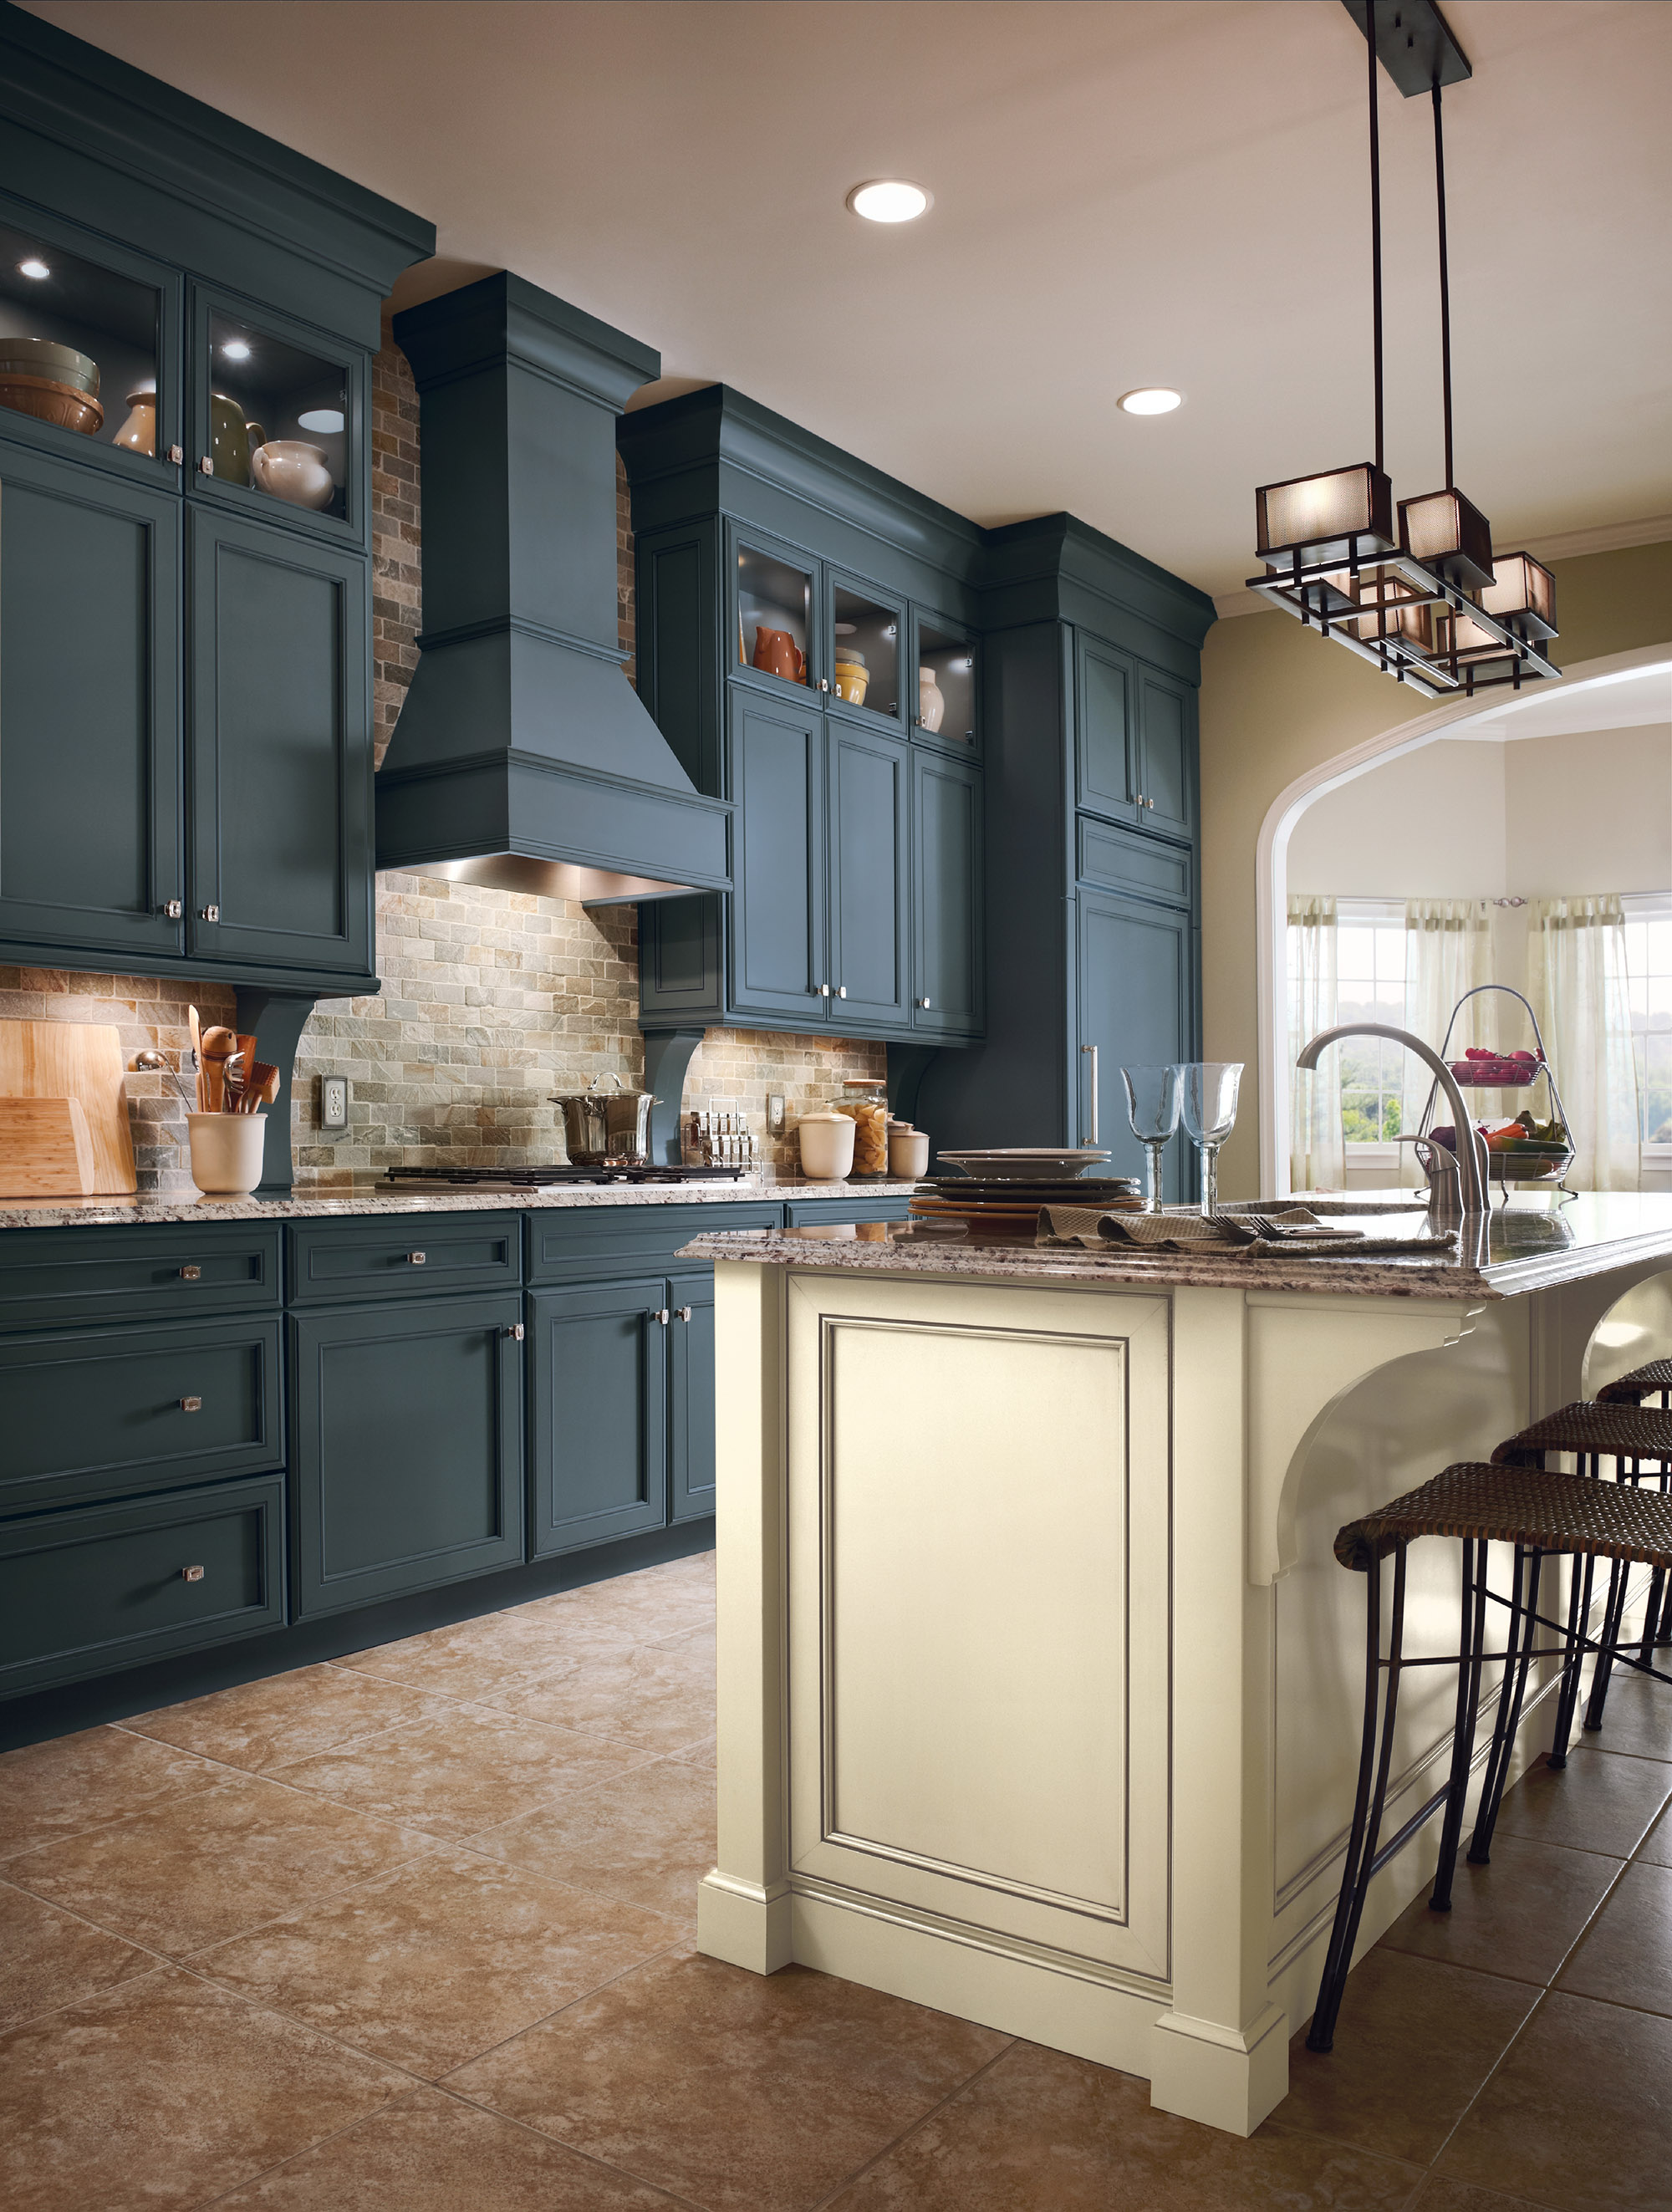 Kraftmaid Kitchen Of The Year, How Expensive Are Kraftmaid Cabinets